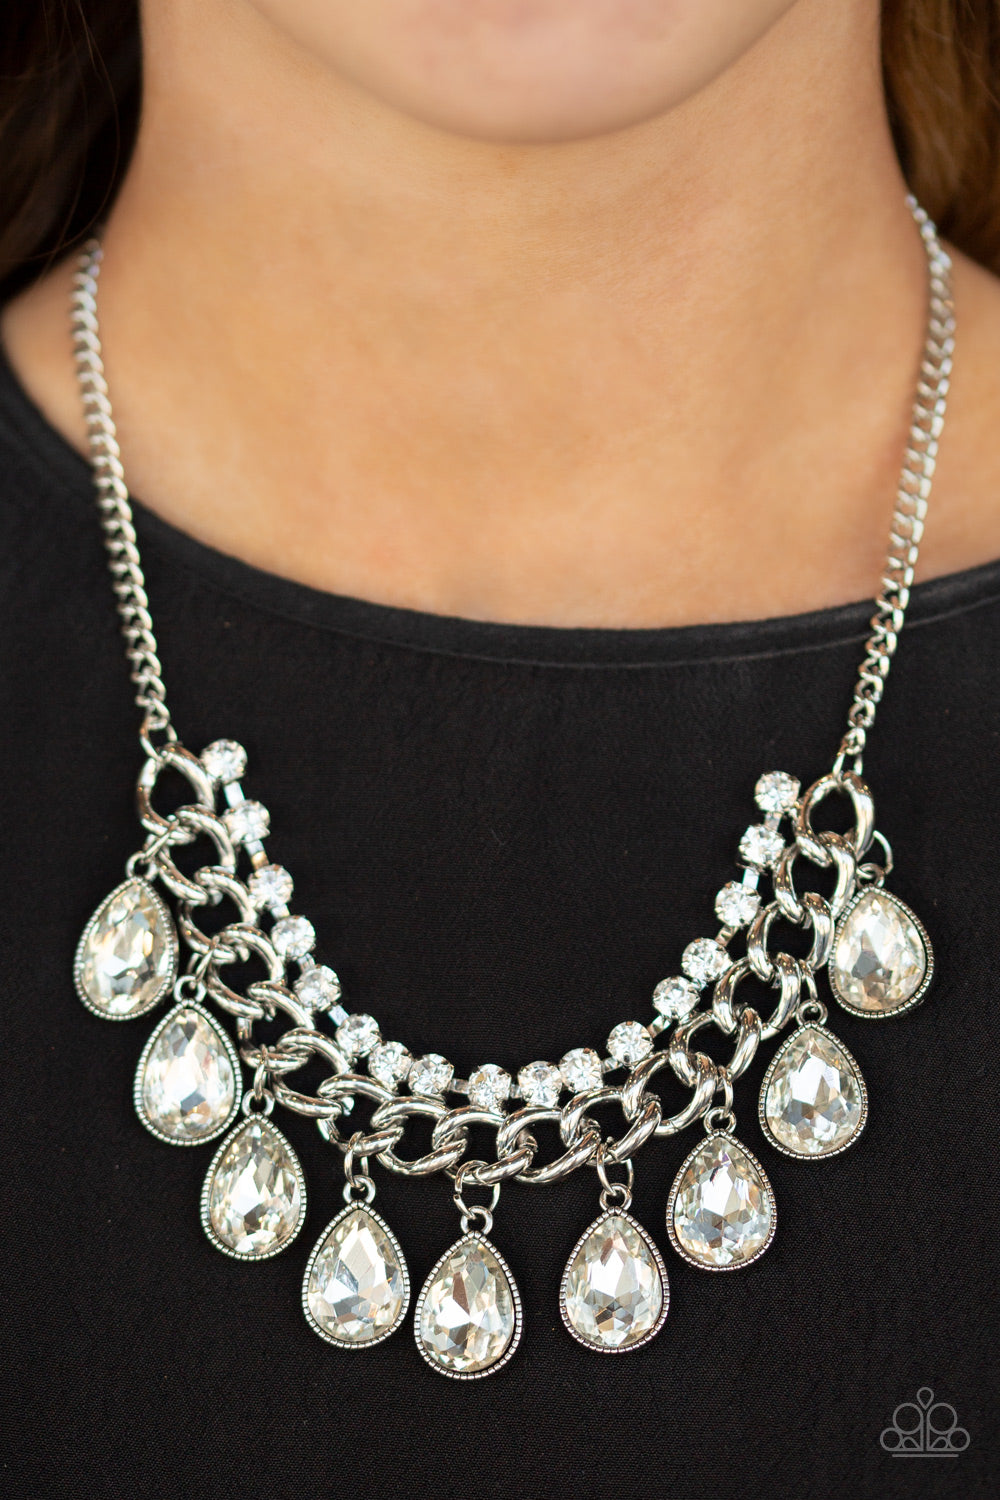 Paparazzi Necklaces - All Toget-HEIR Now - White